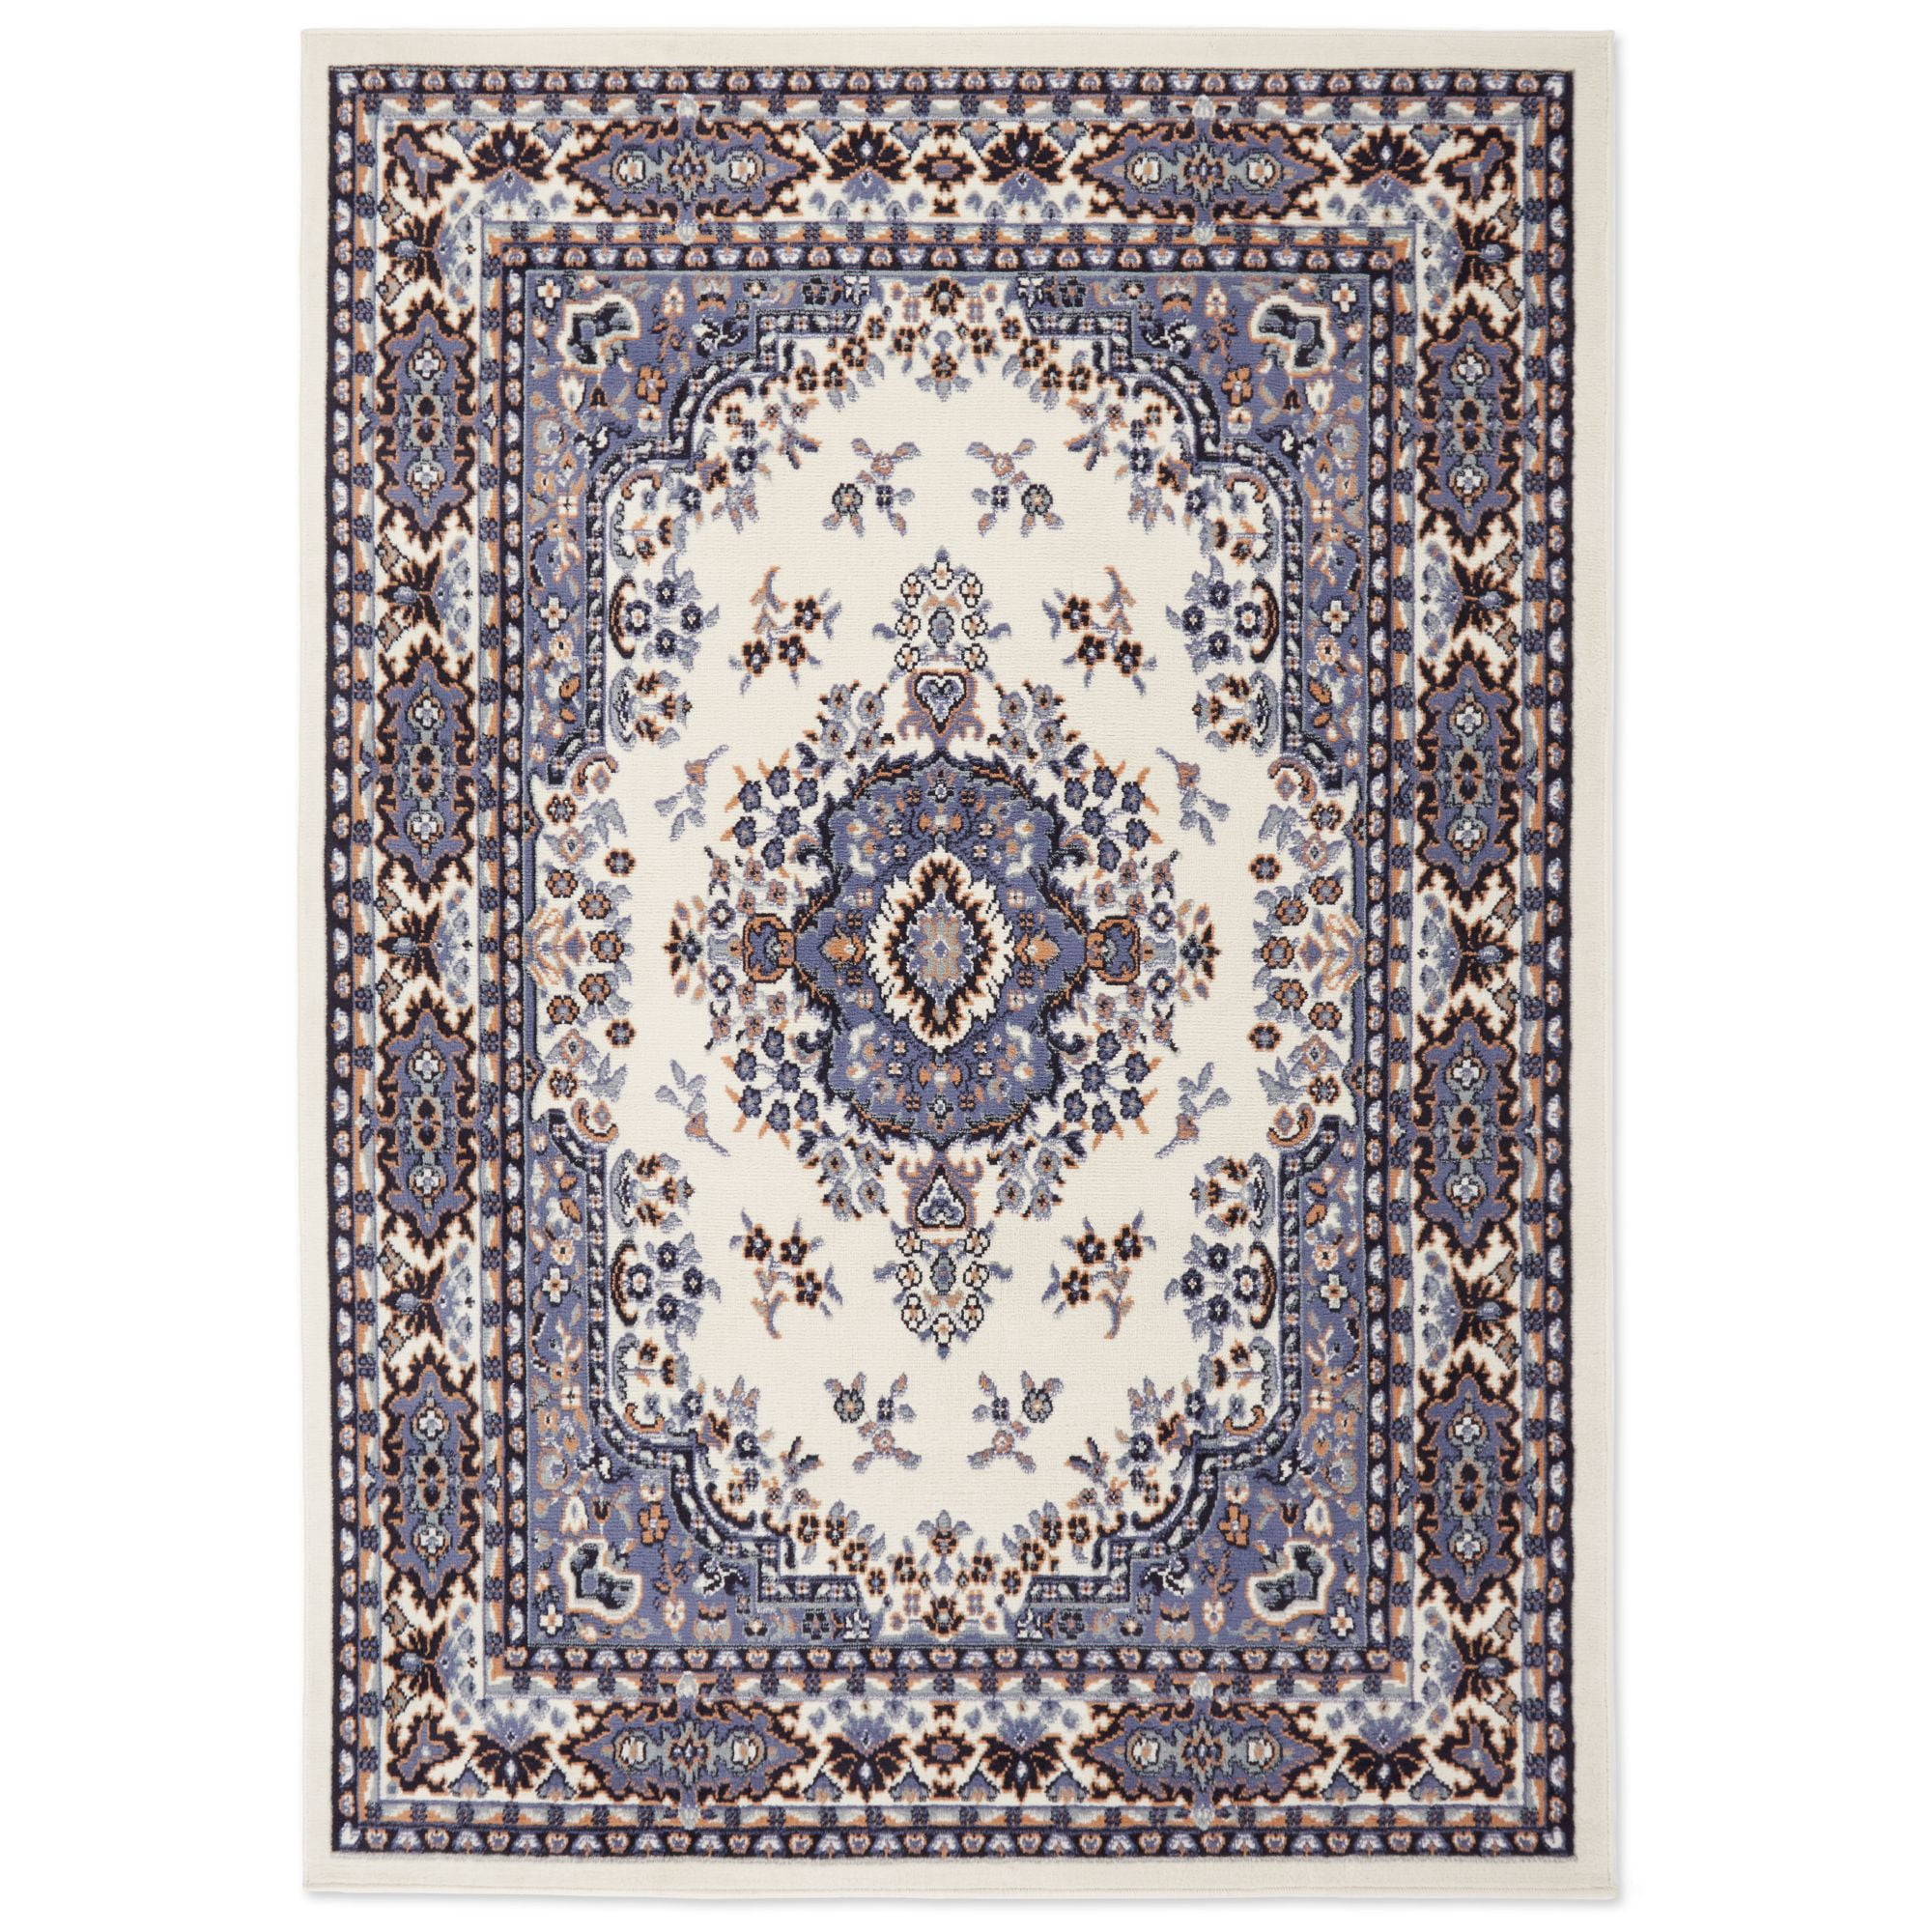 Super Area Rugs Updated Persian Medallion Area Rug Ivory 3' 3 X 4' 7 